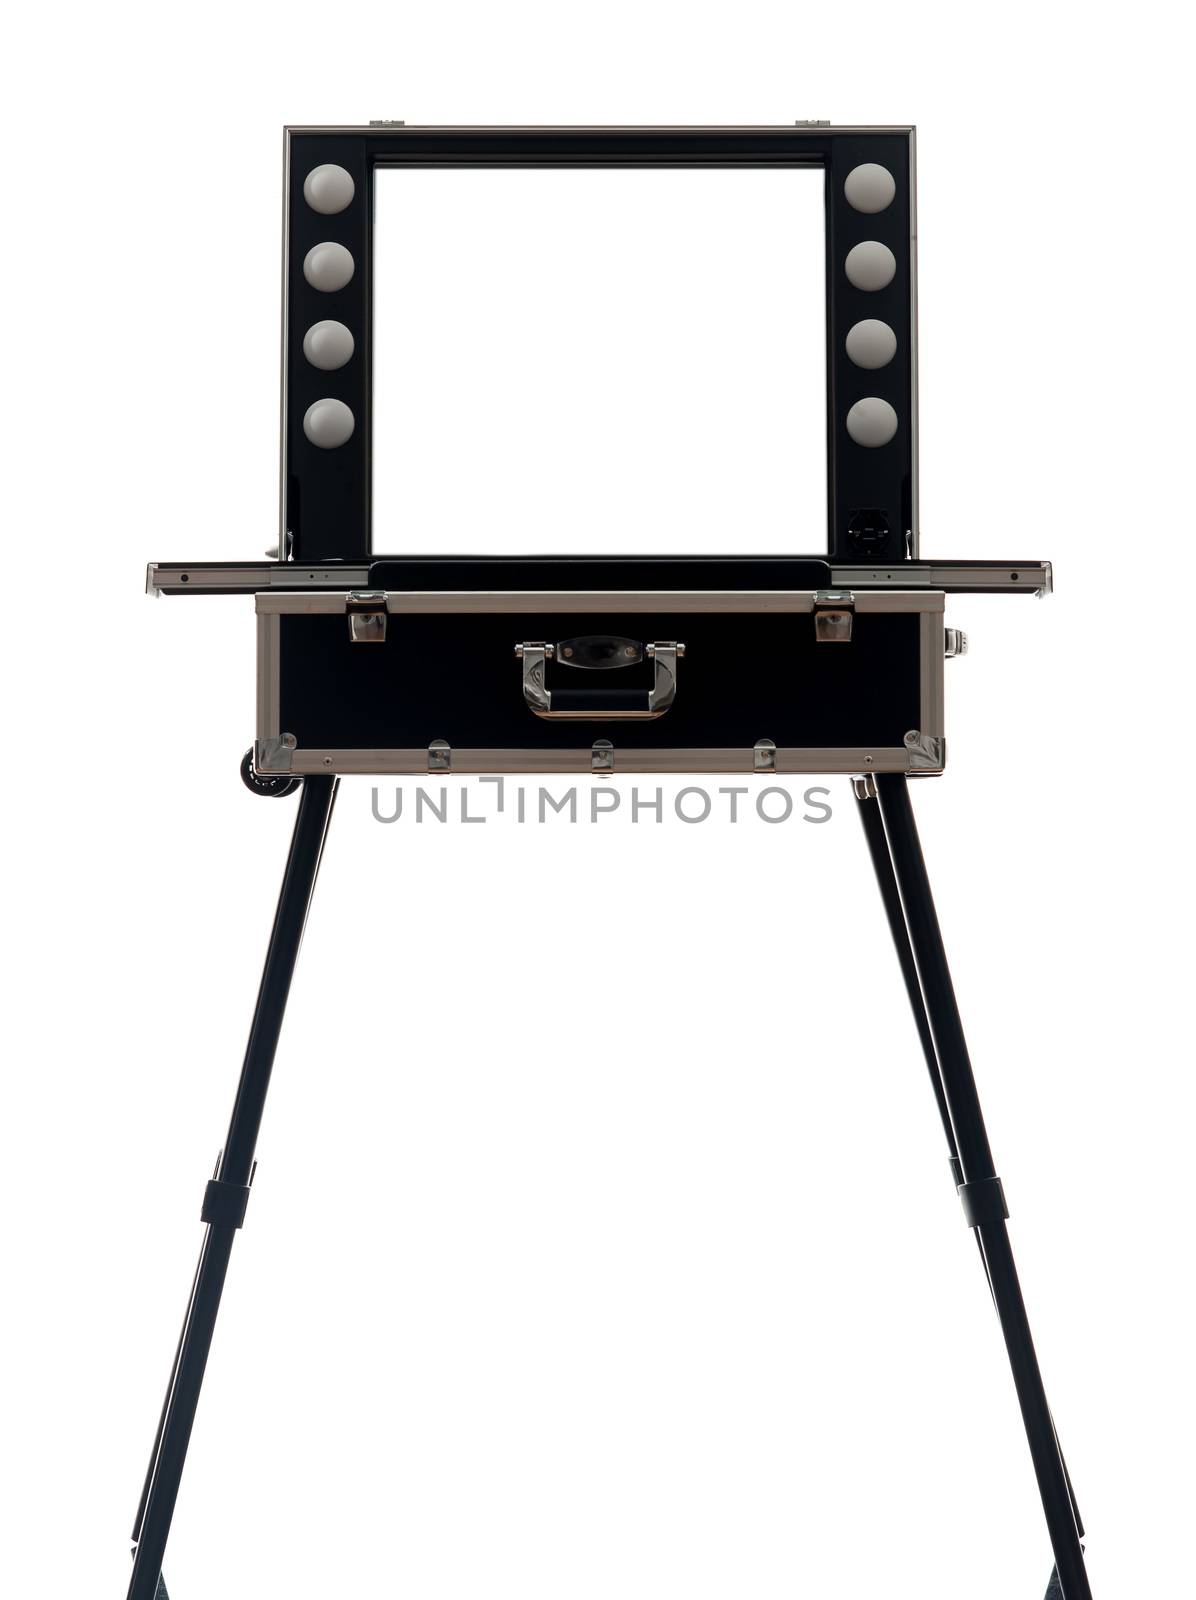 one  make up artist suitcase  in silhouette  on white background